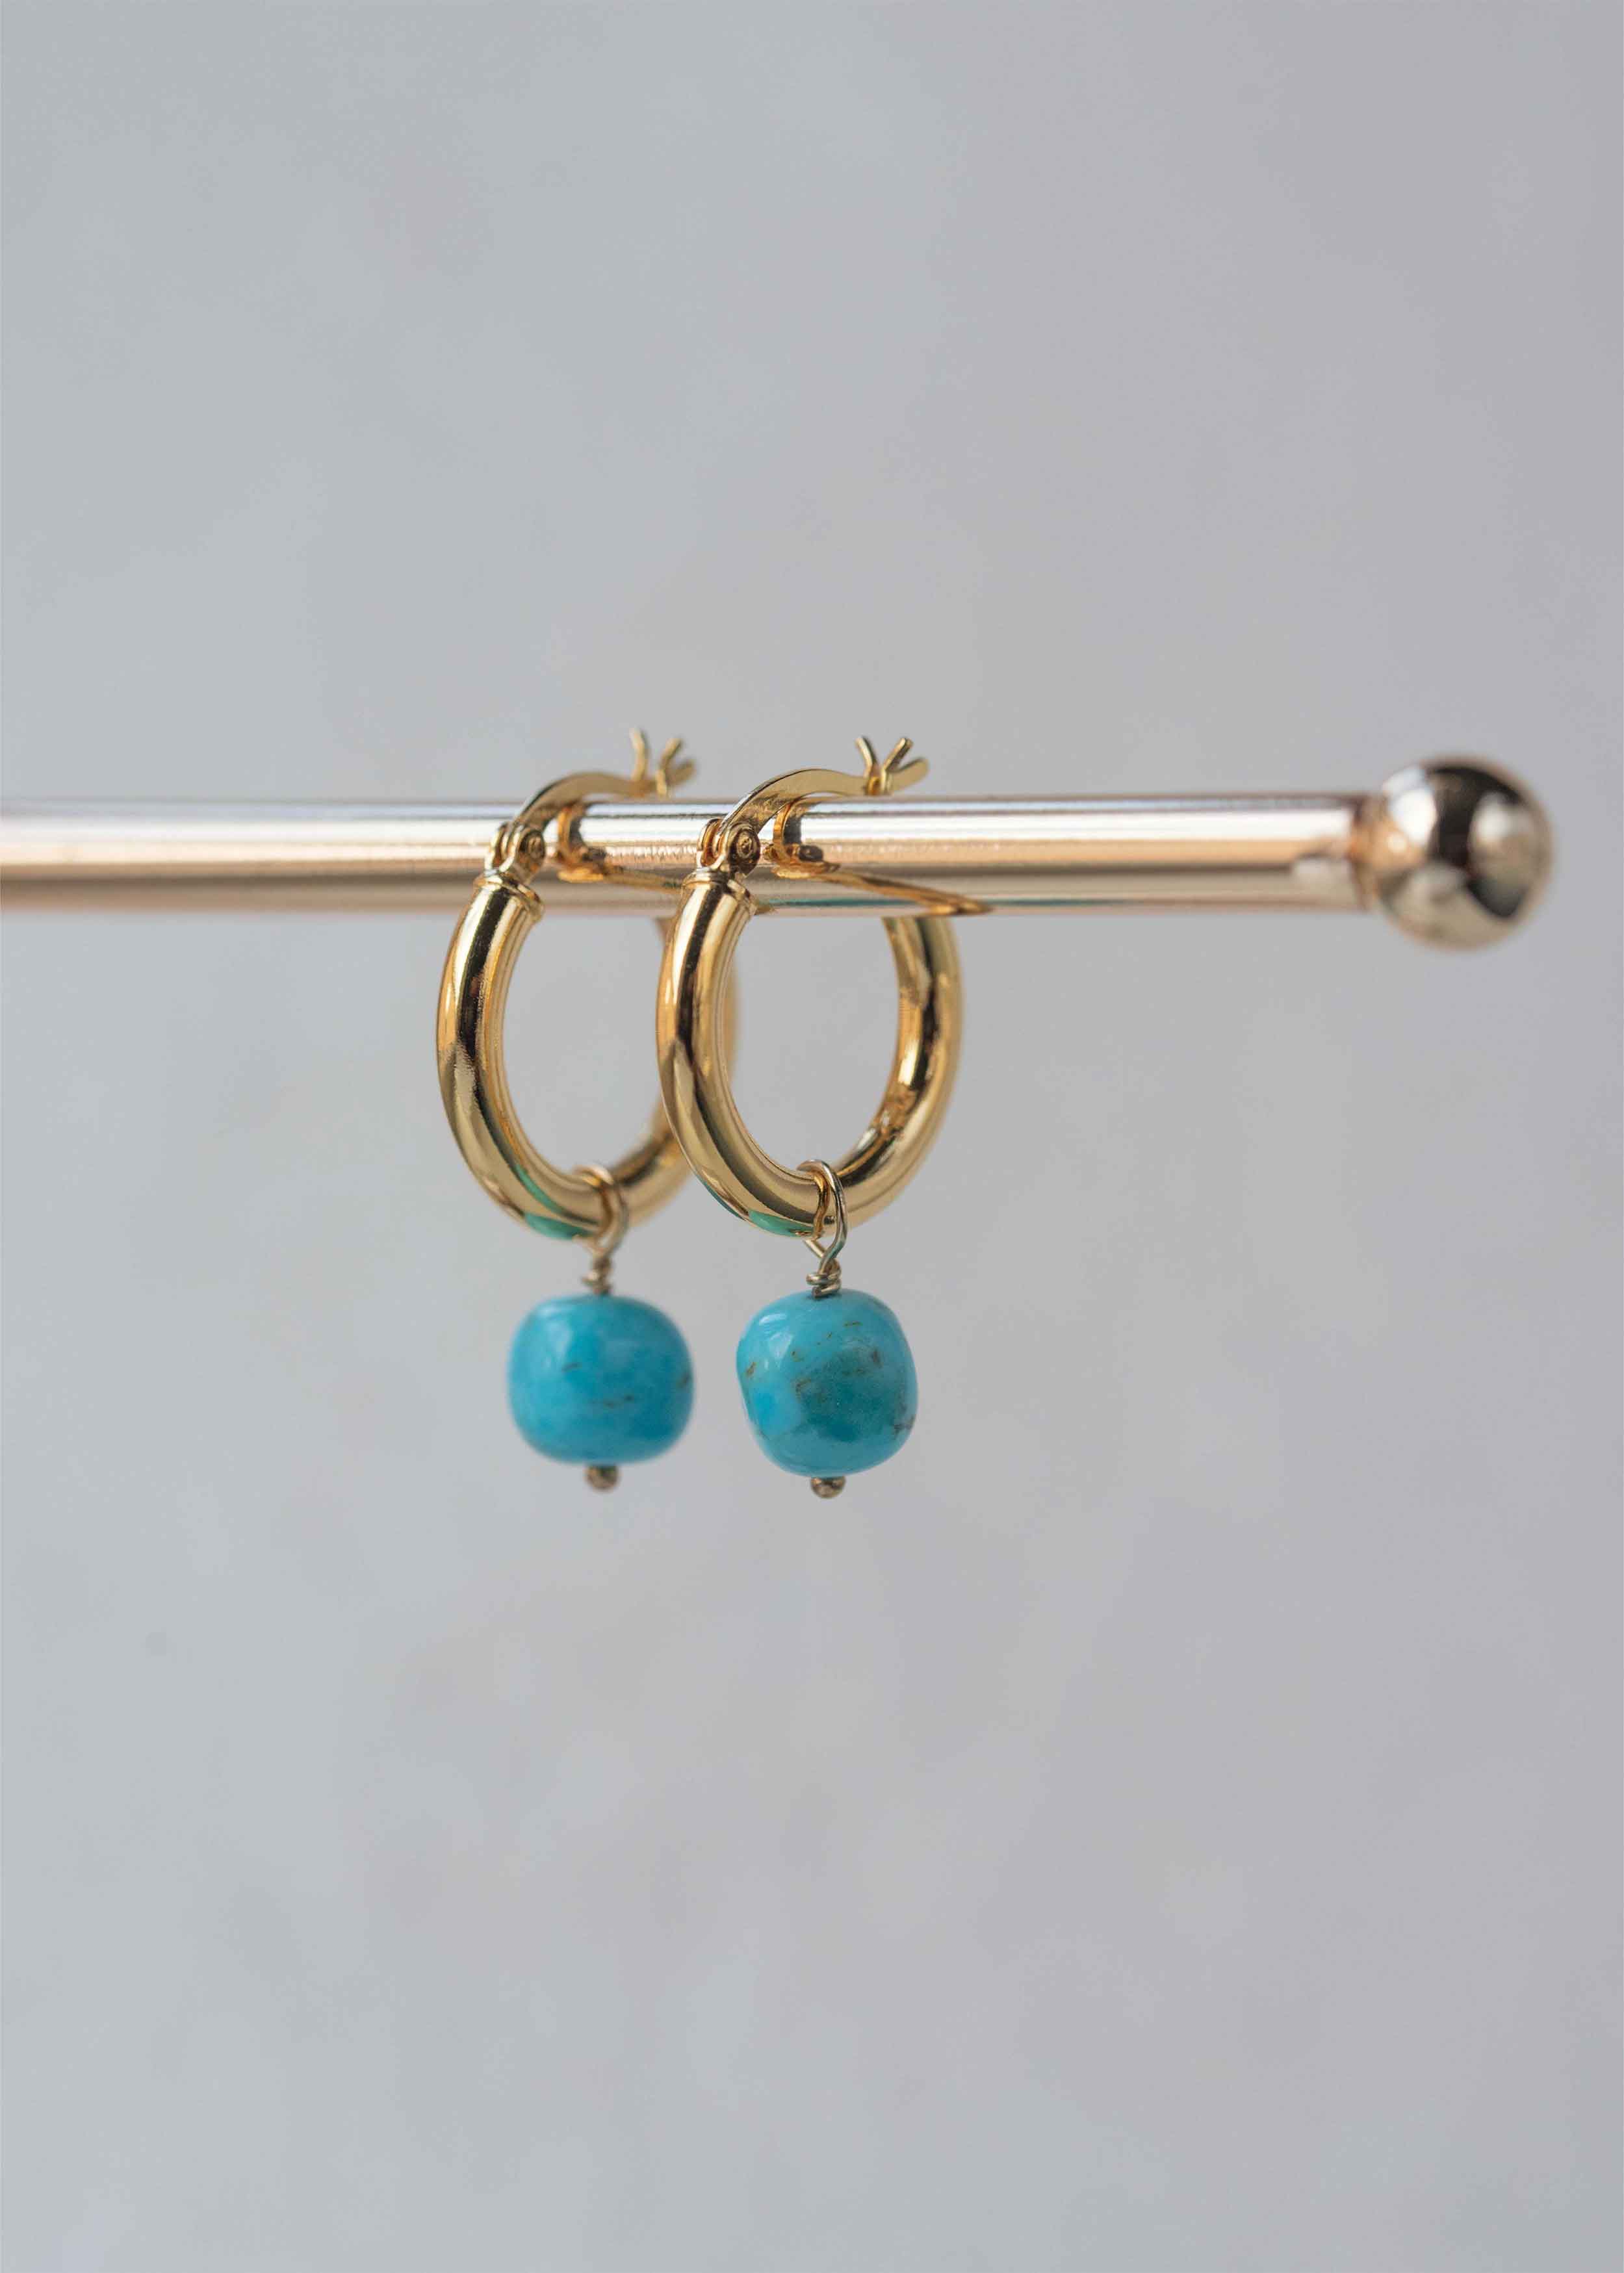 Turquoise Hoops - 2 pairs